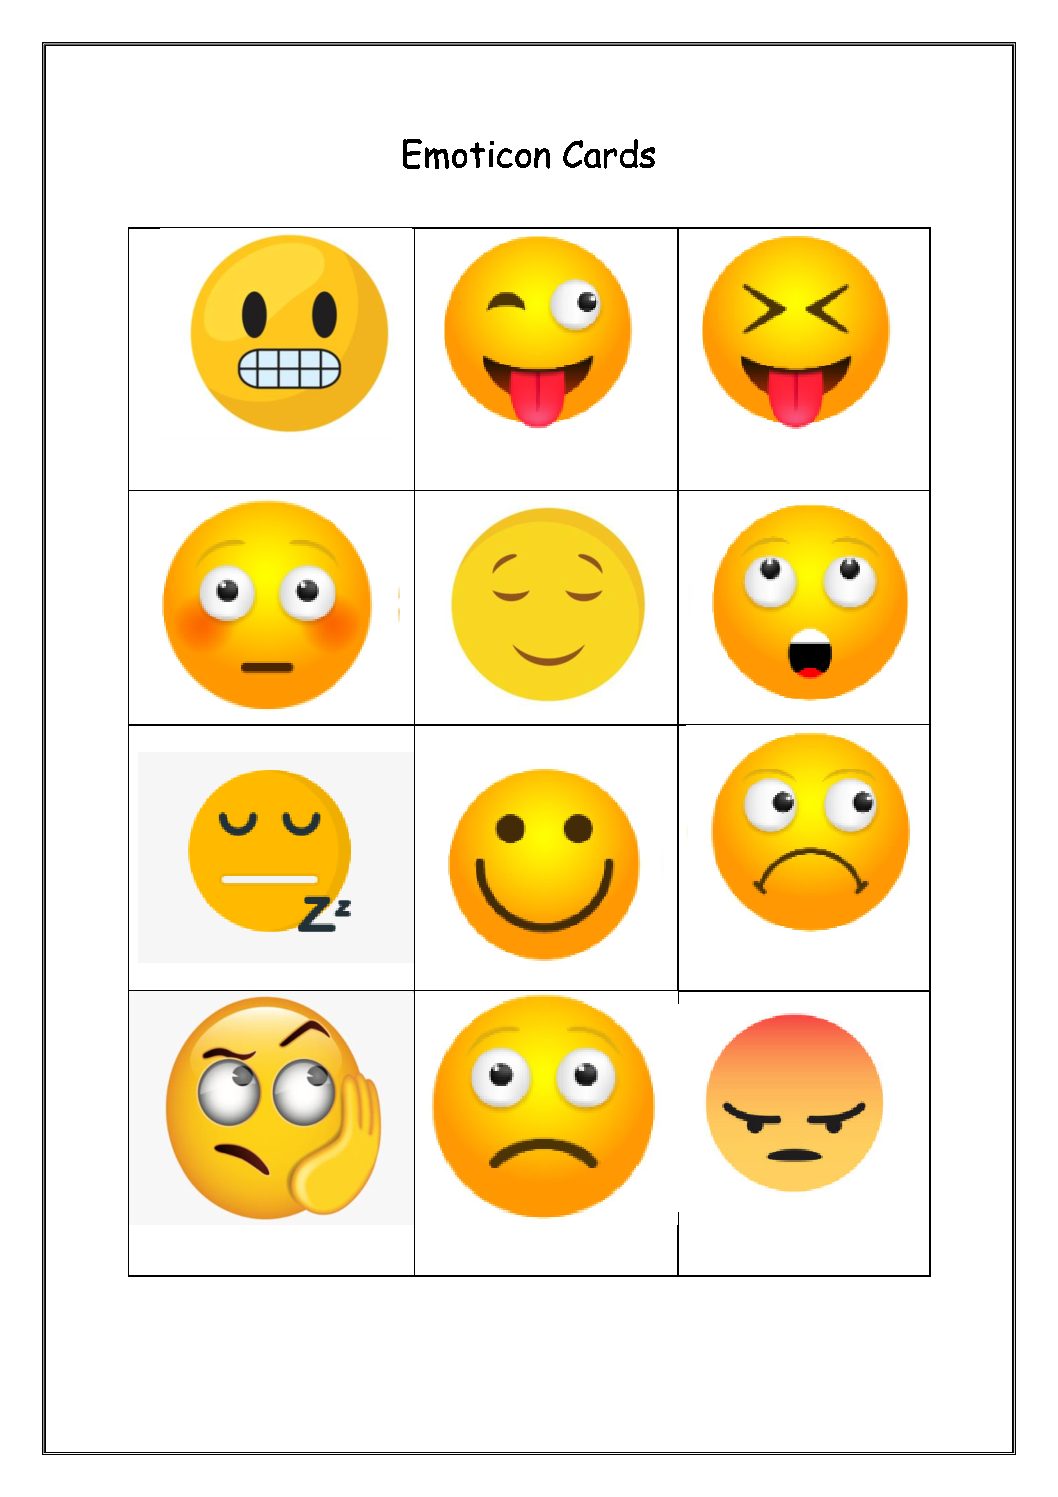 some cards funny emoticons for same time